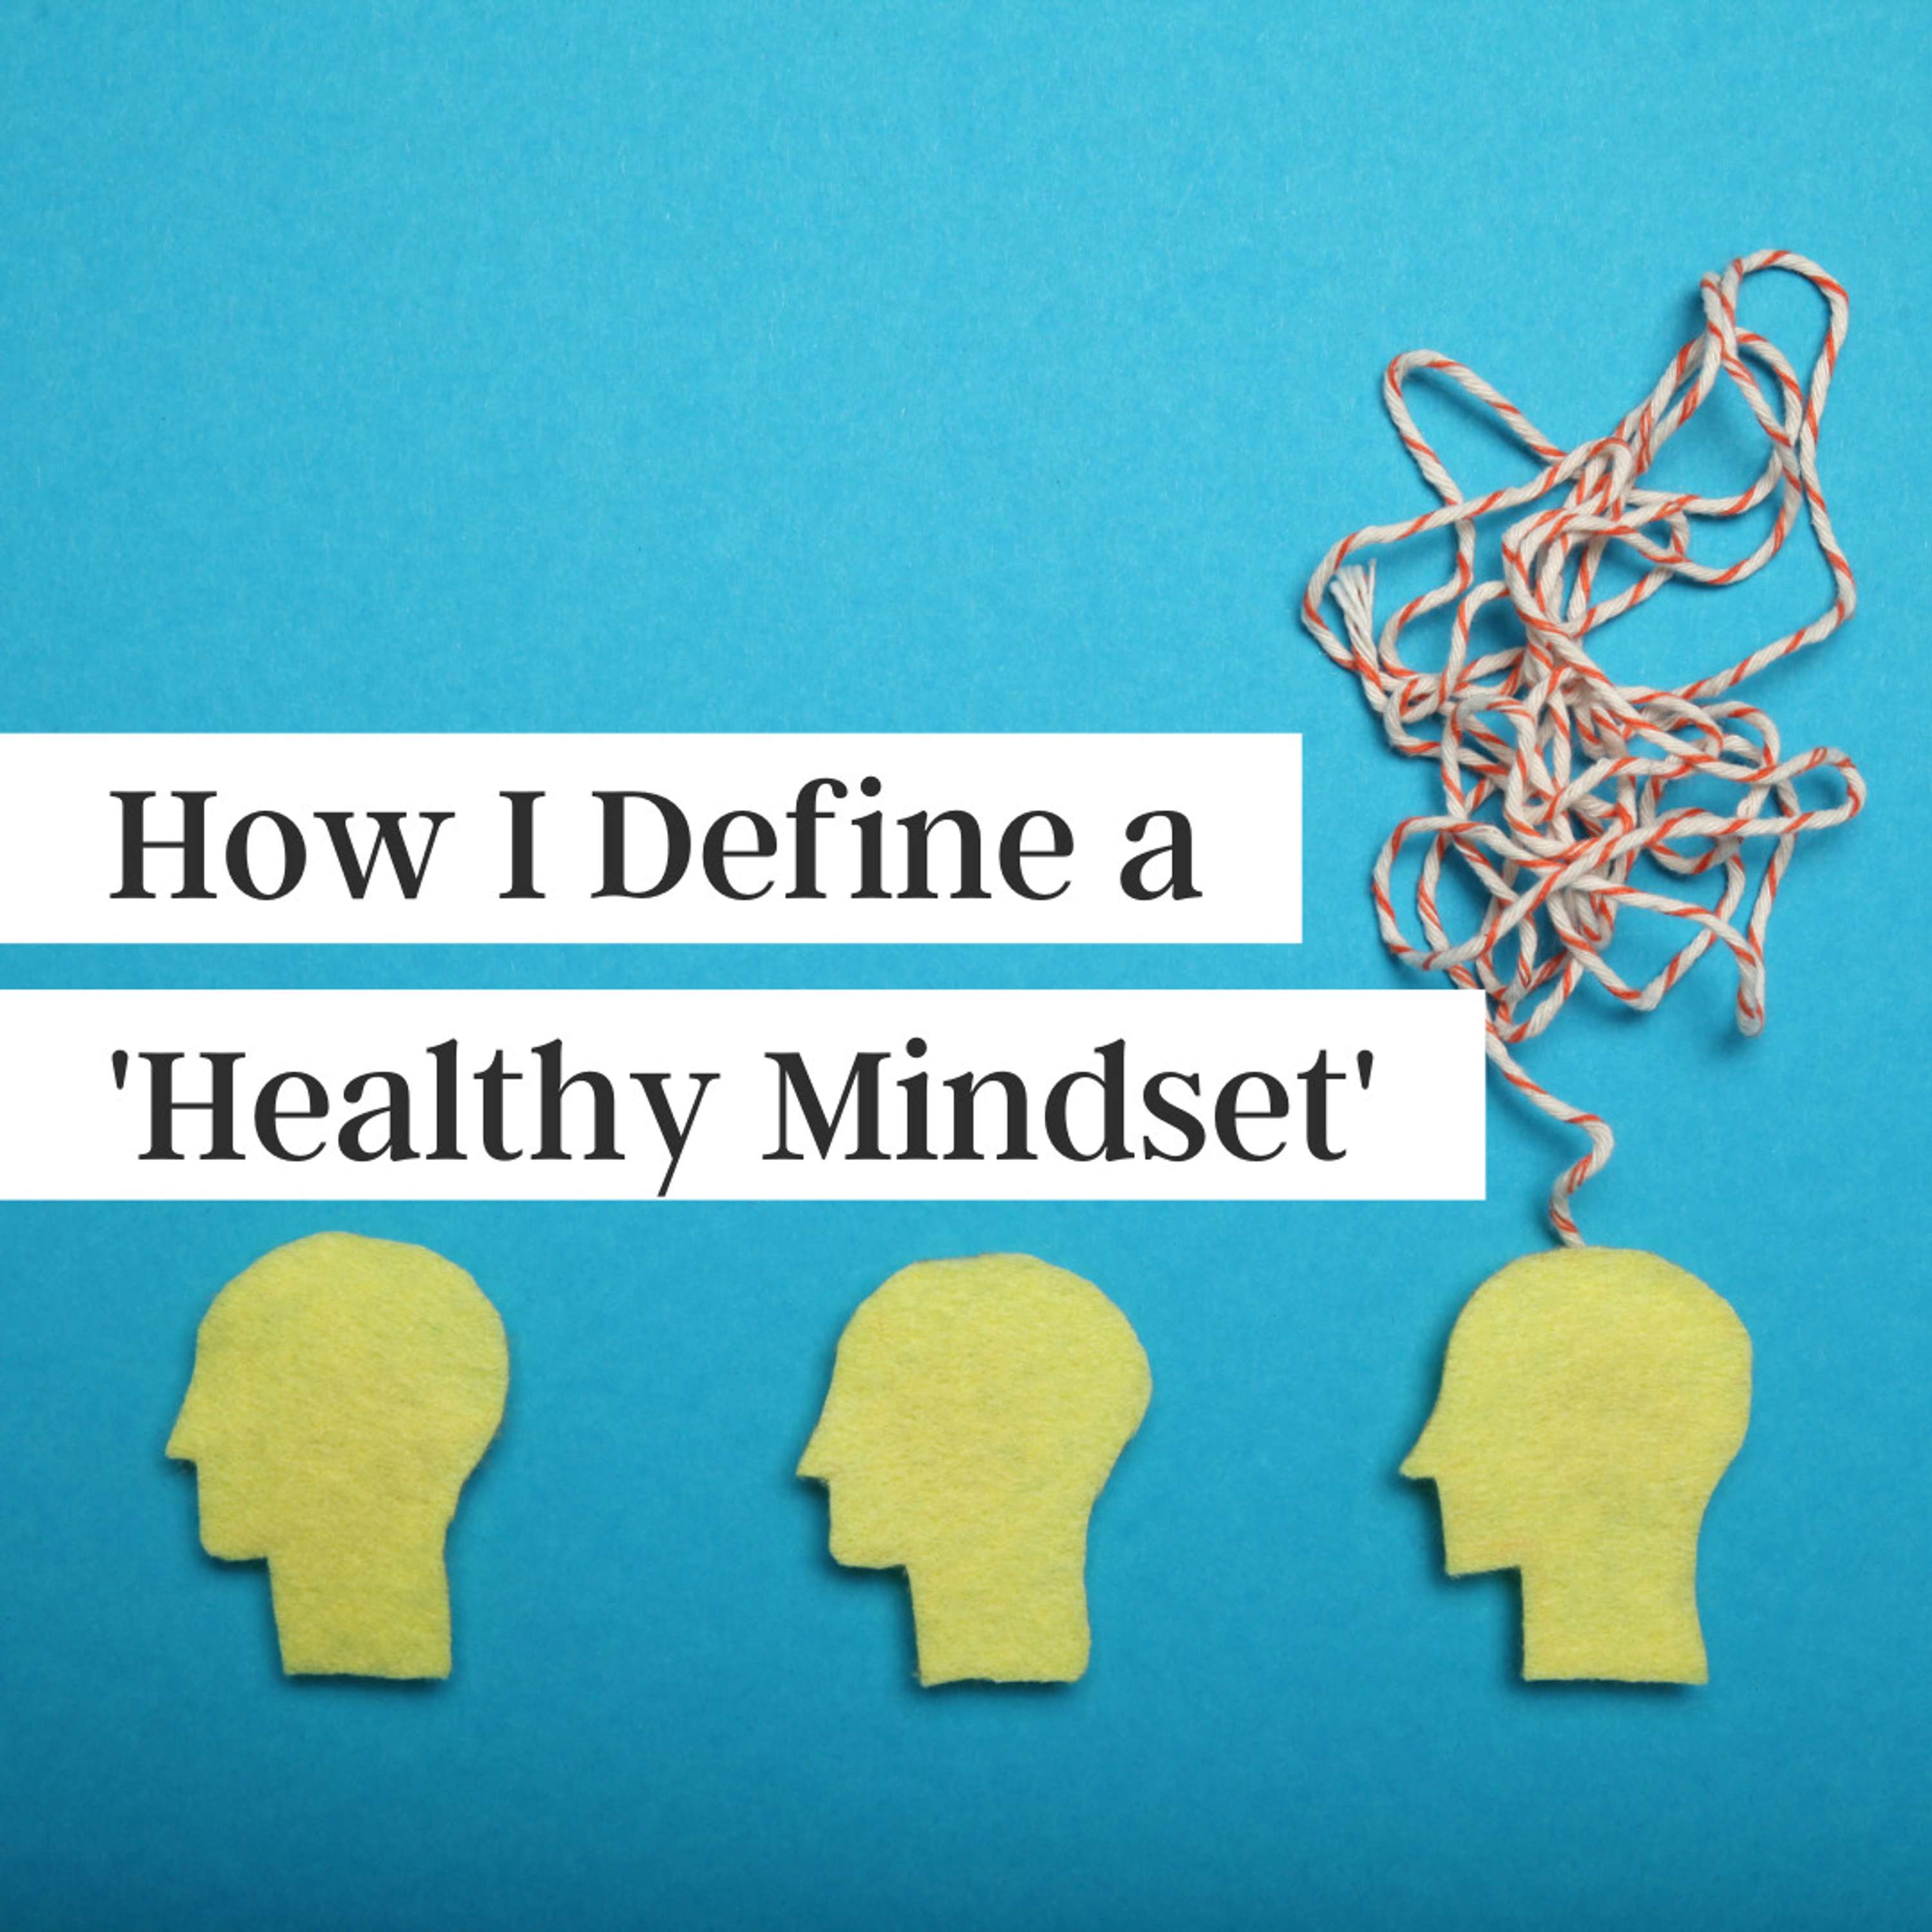 What is a ”Healthy Mindset”?